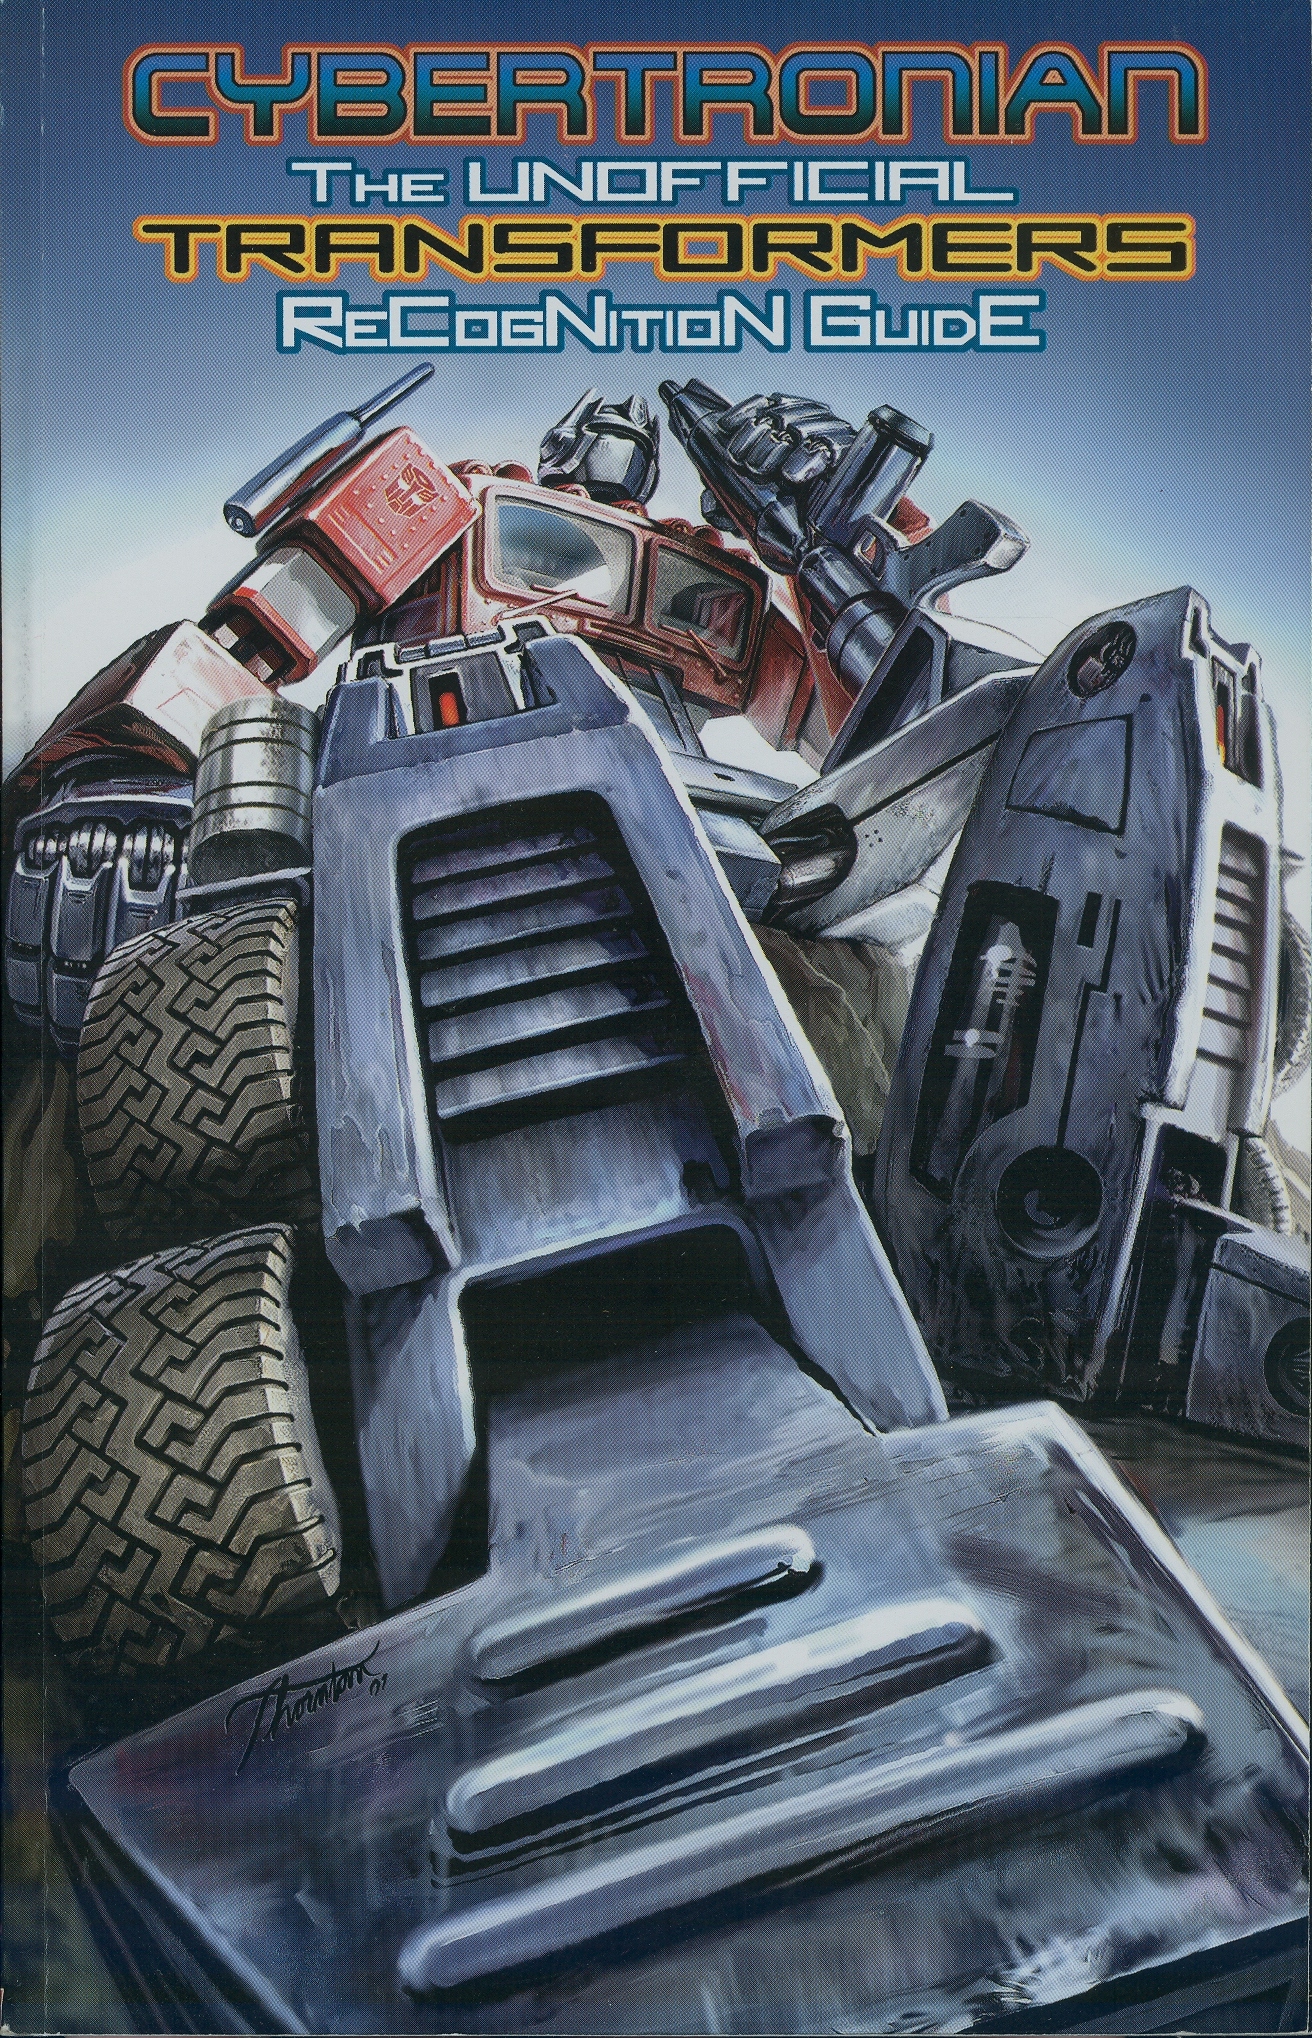 Read online Cybertronian: An Unofficial Transformers Recognition Guide comic -  Issue #2 - 1